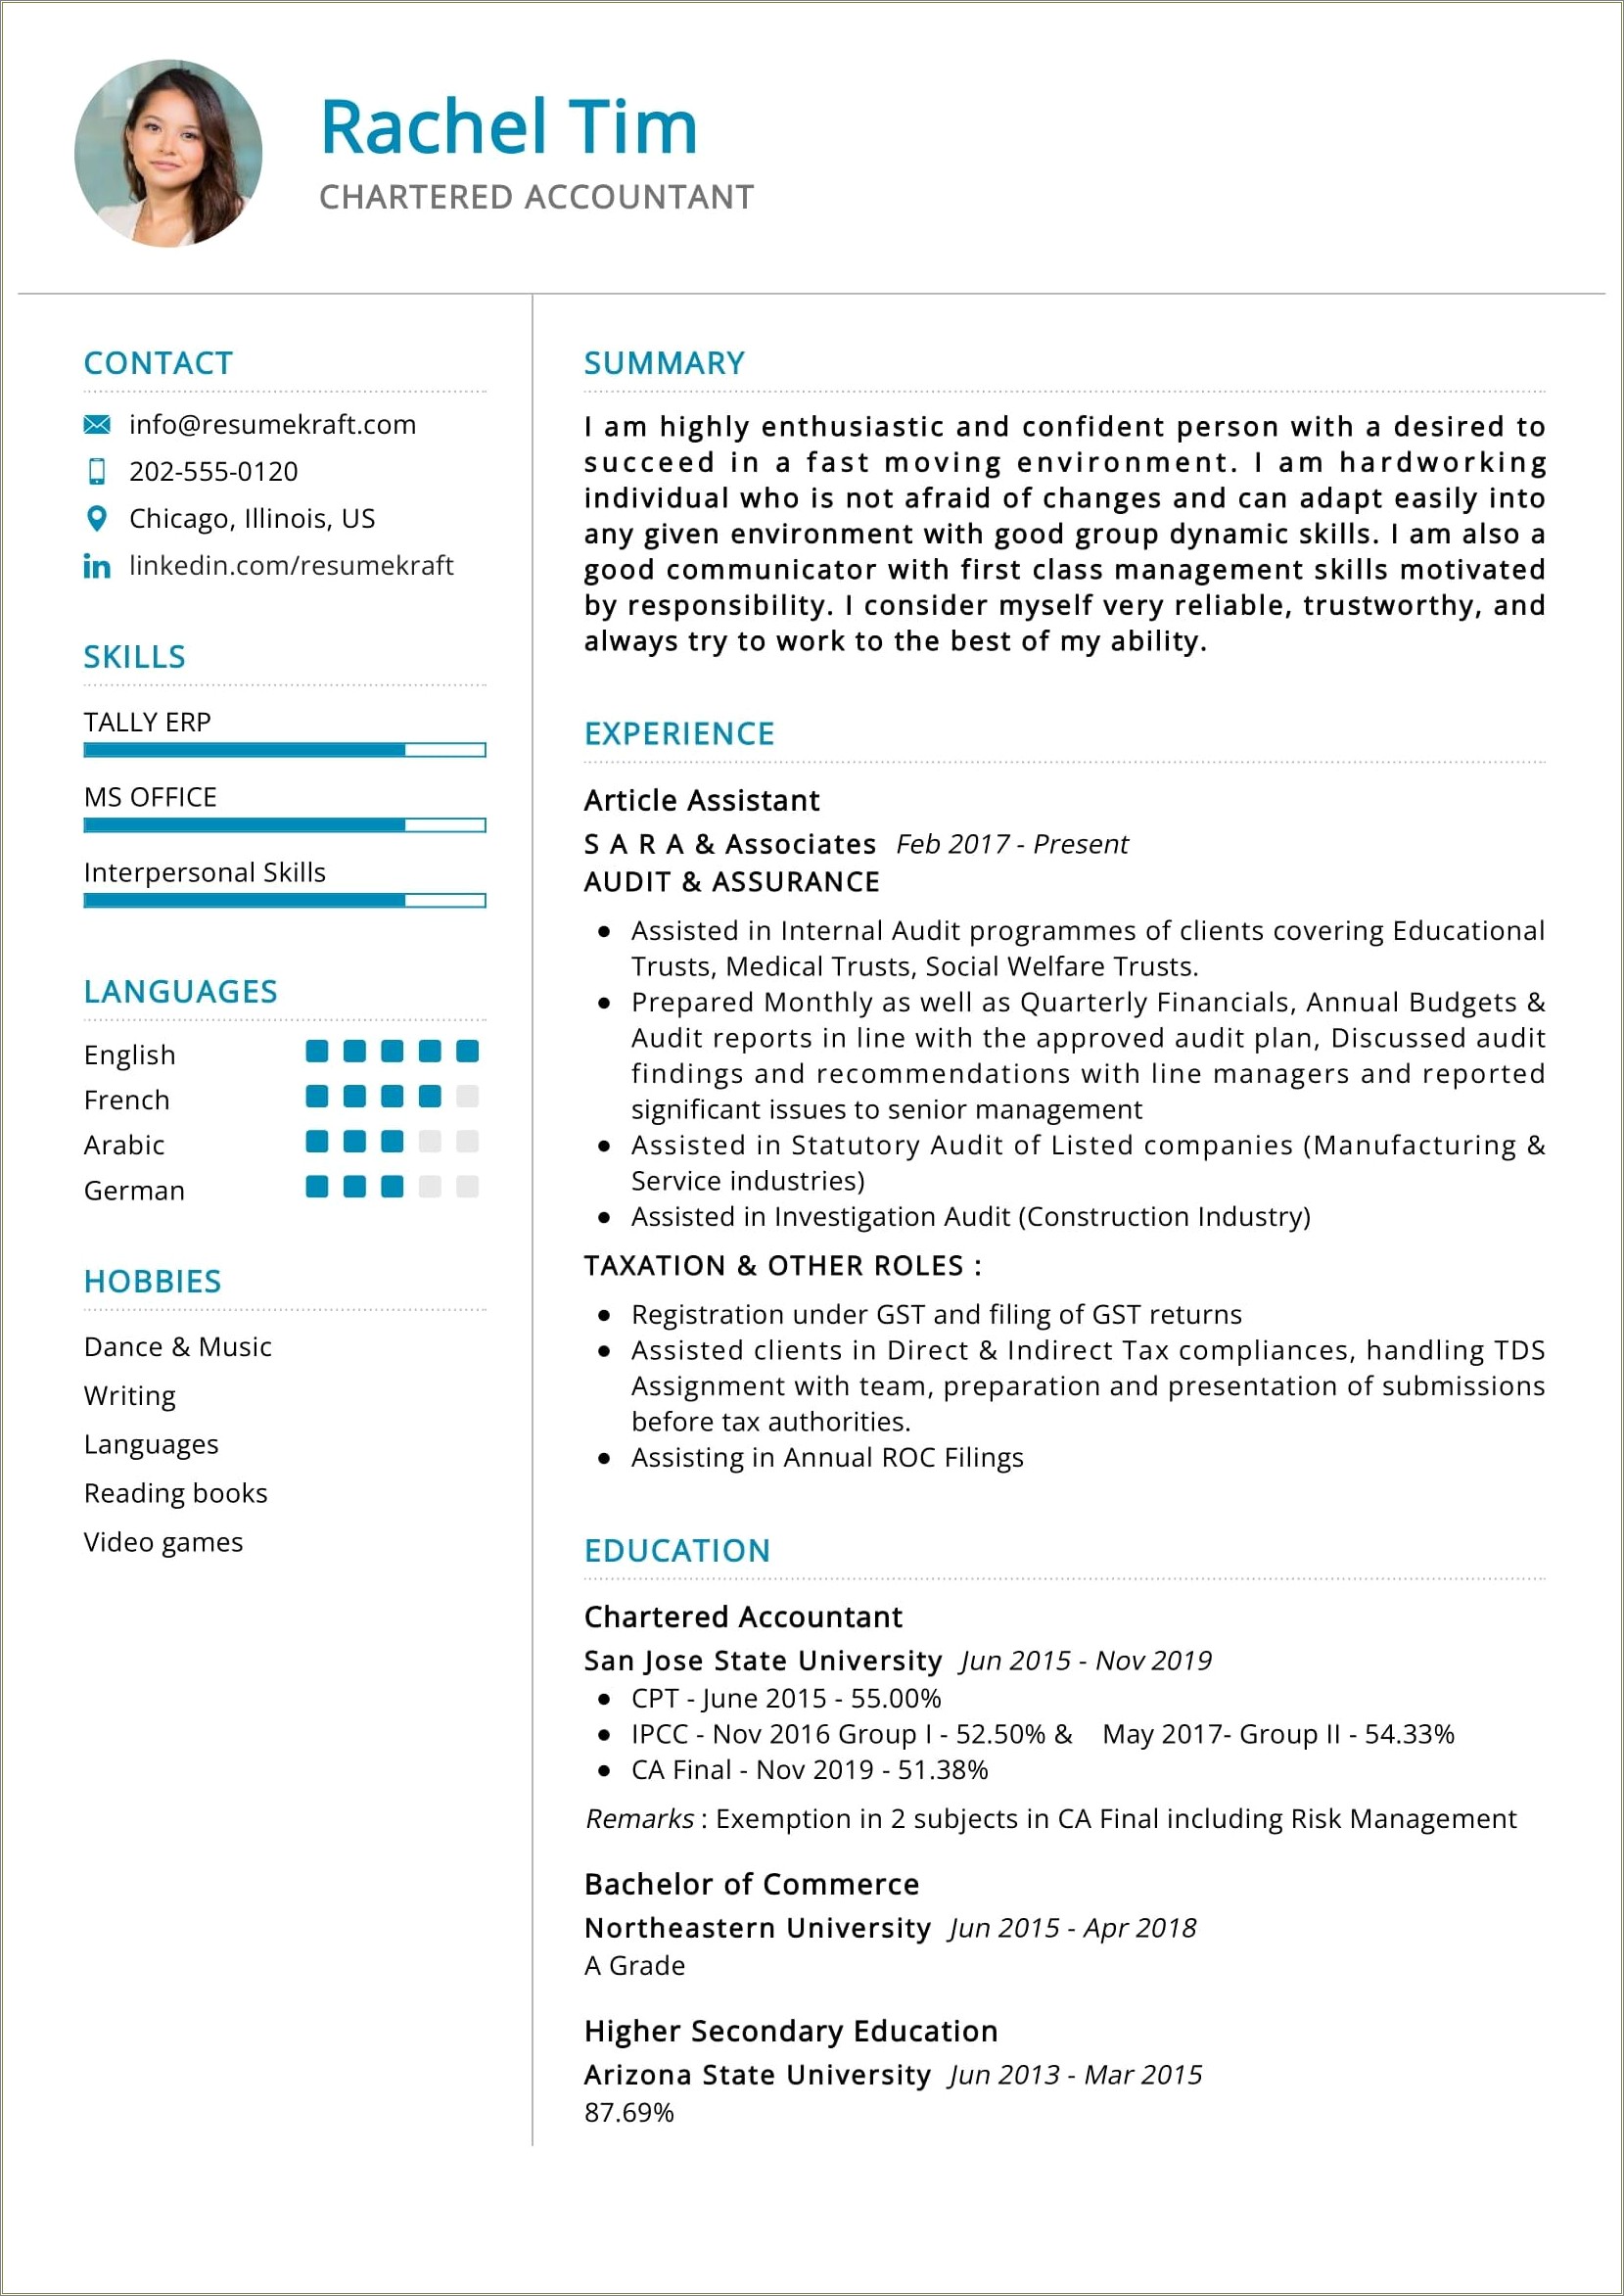 Best Resume For Experienced Chartered Accountant